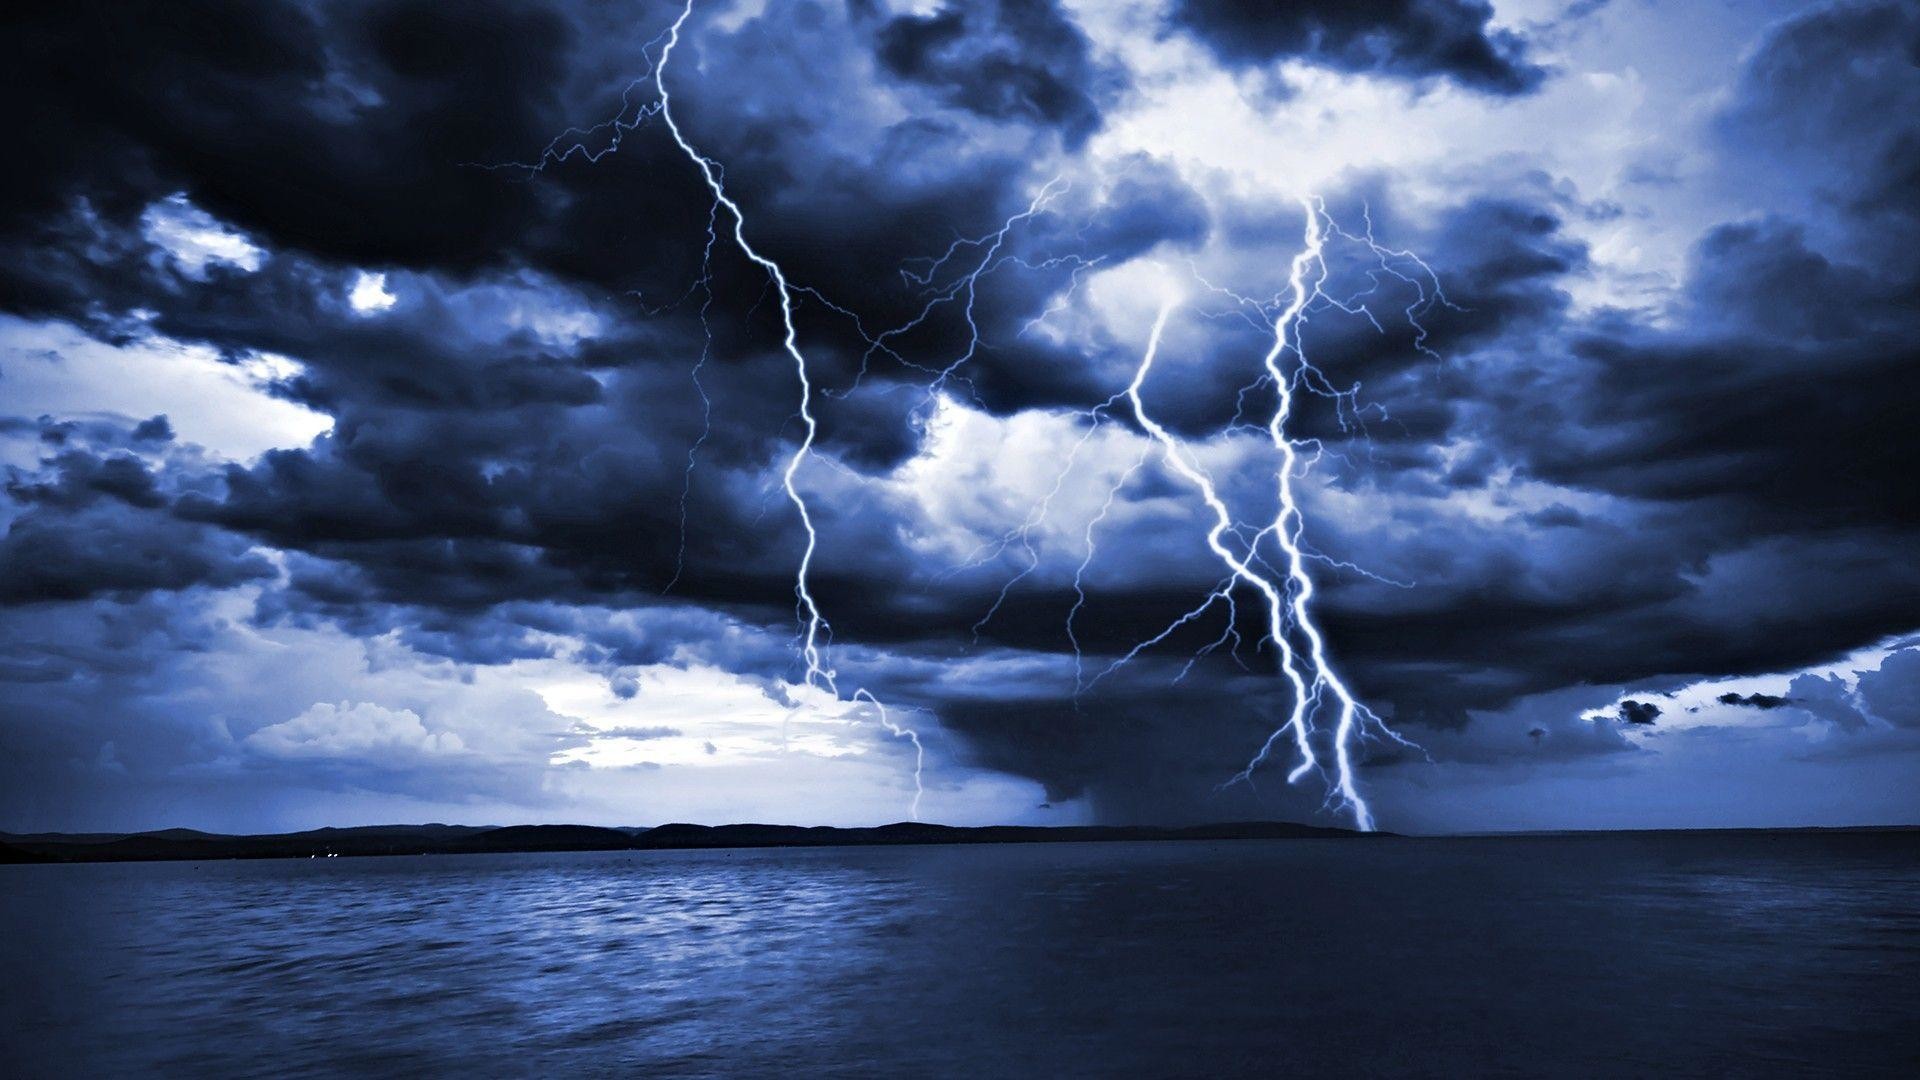 1920x1080 Thunderstorm Clouds Wallpaper - Viewing Gallery